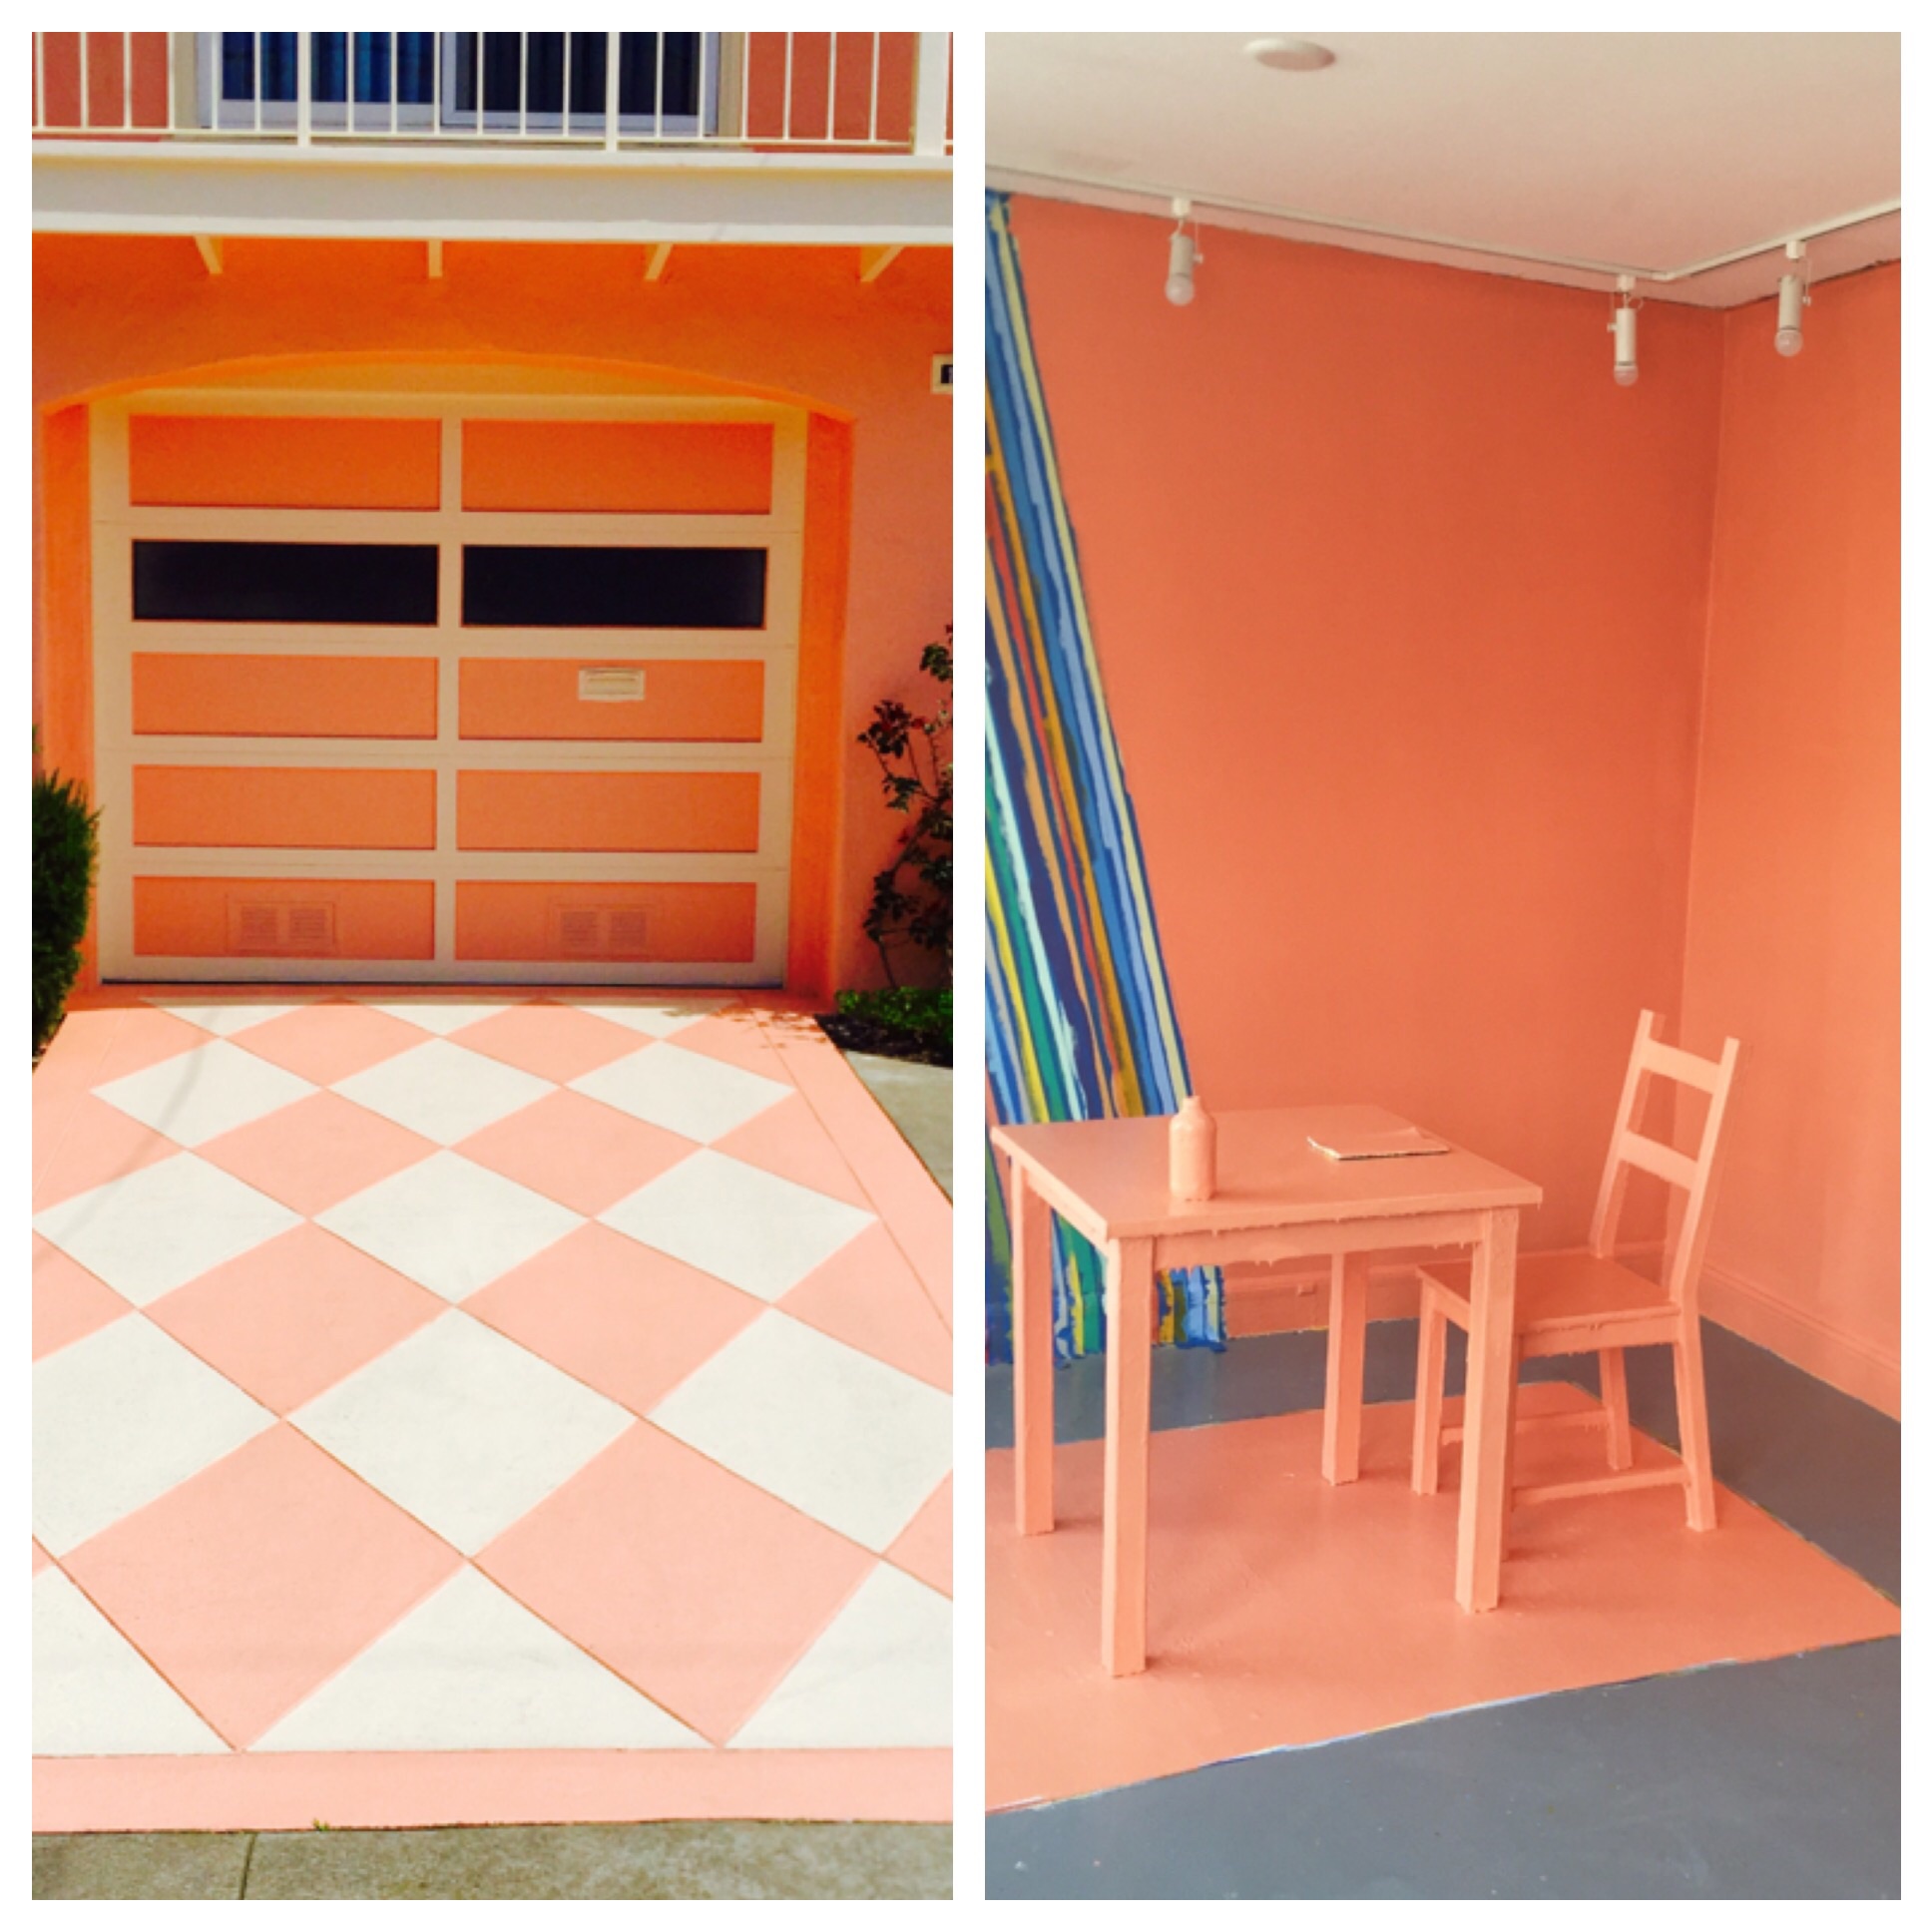 Leah Rosenberg, Everyday, a color, 2015. Left: source color taken from the world; right: painted gallery at Irving Street Projects. Photo courtesy of Leah Rosenberg.